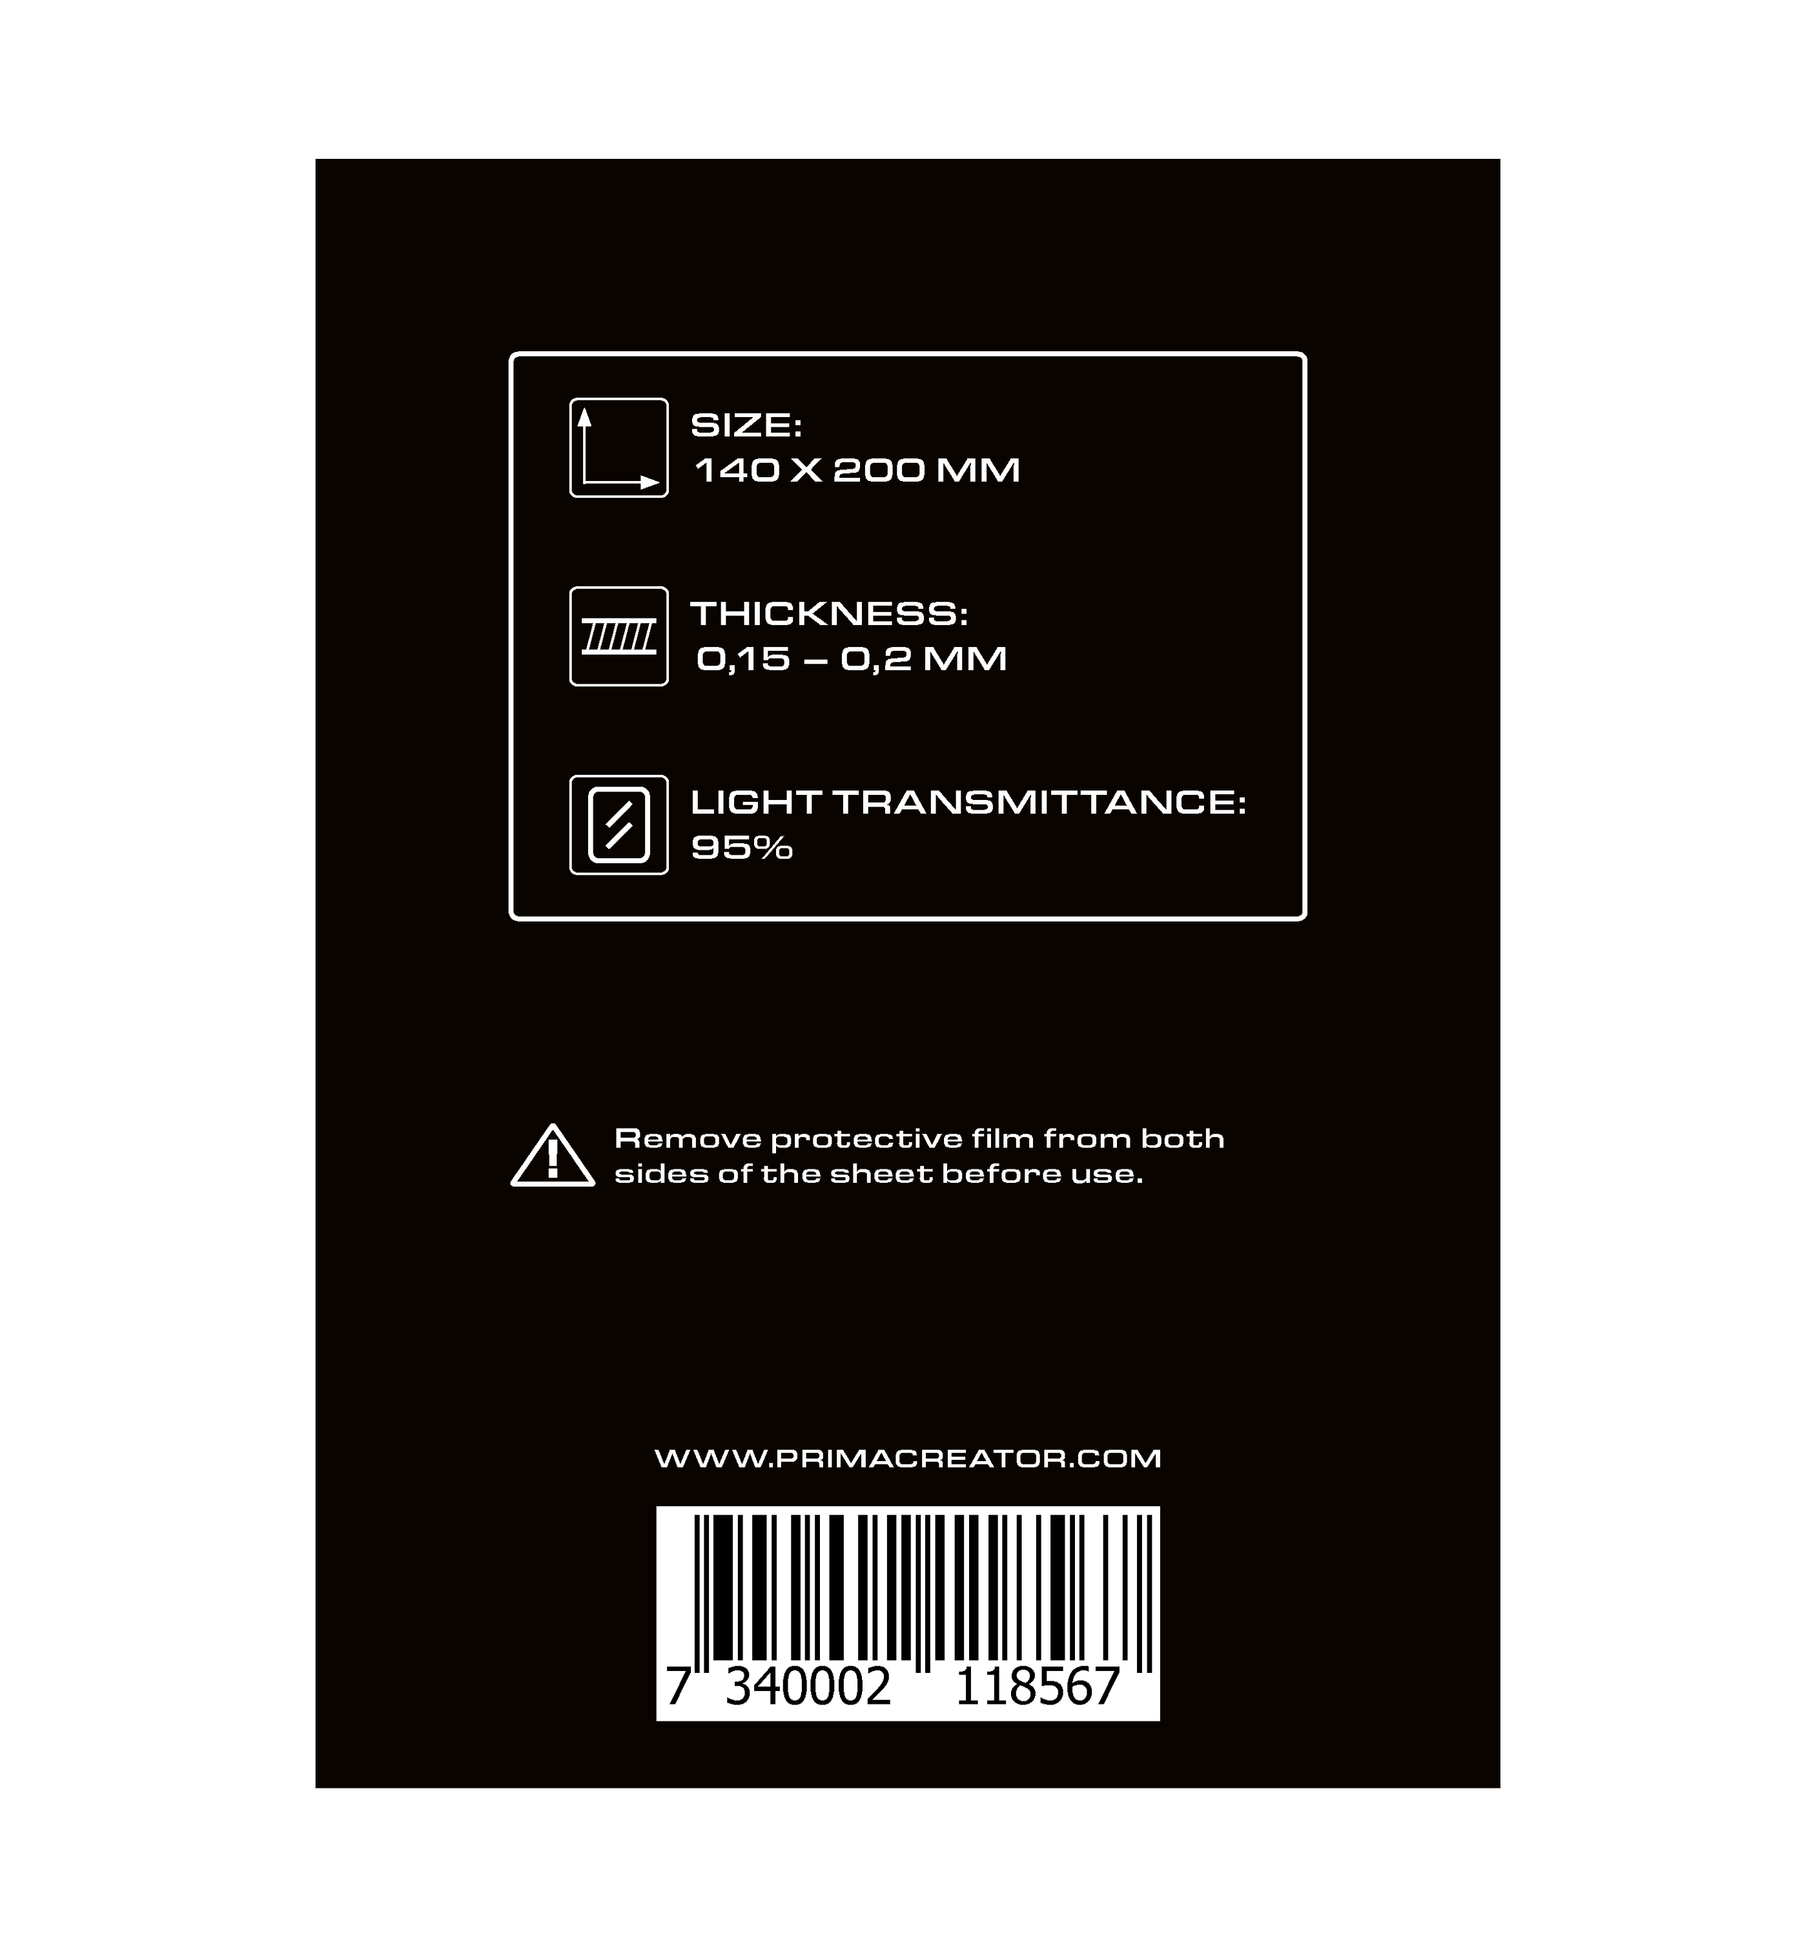 Nfep Film Sheets For 3d Printers - 140 X 200 Mm - 3-Pack